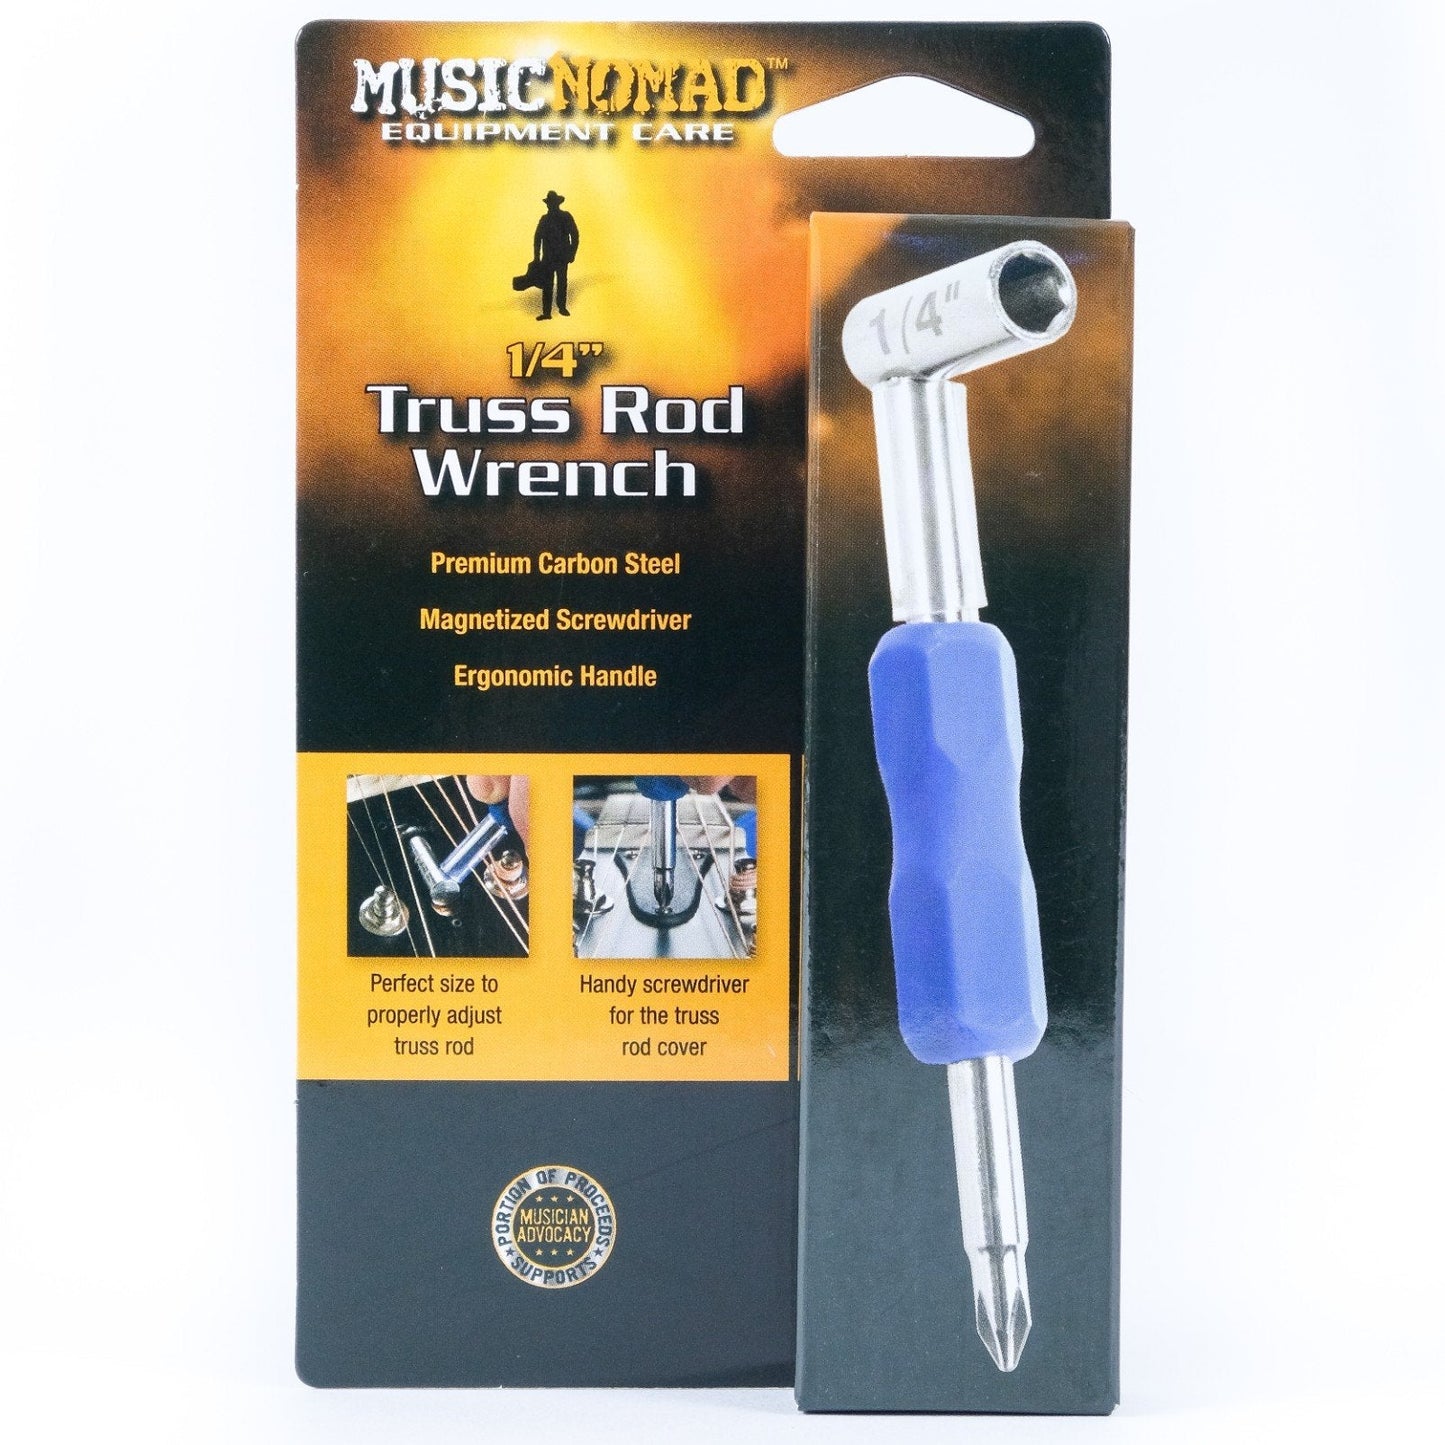 Music Nomad Premium Truss Rod Wrench 1/4 inch for Taylor MN231 - GuitarPusher